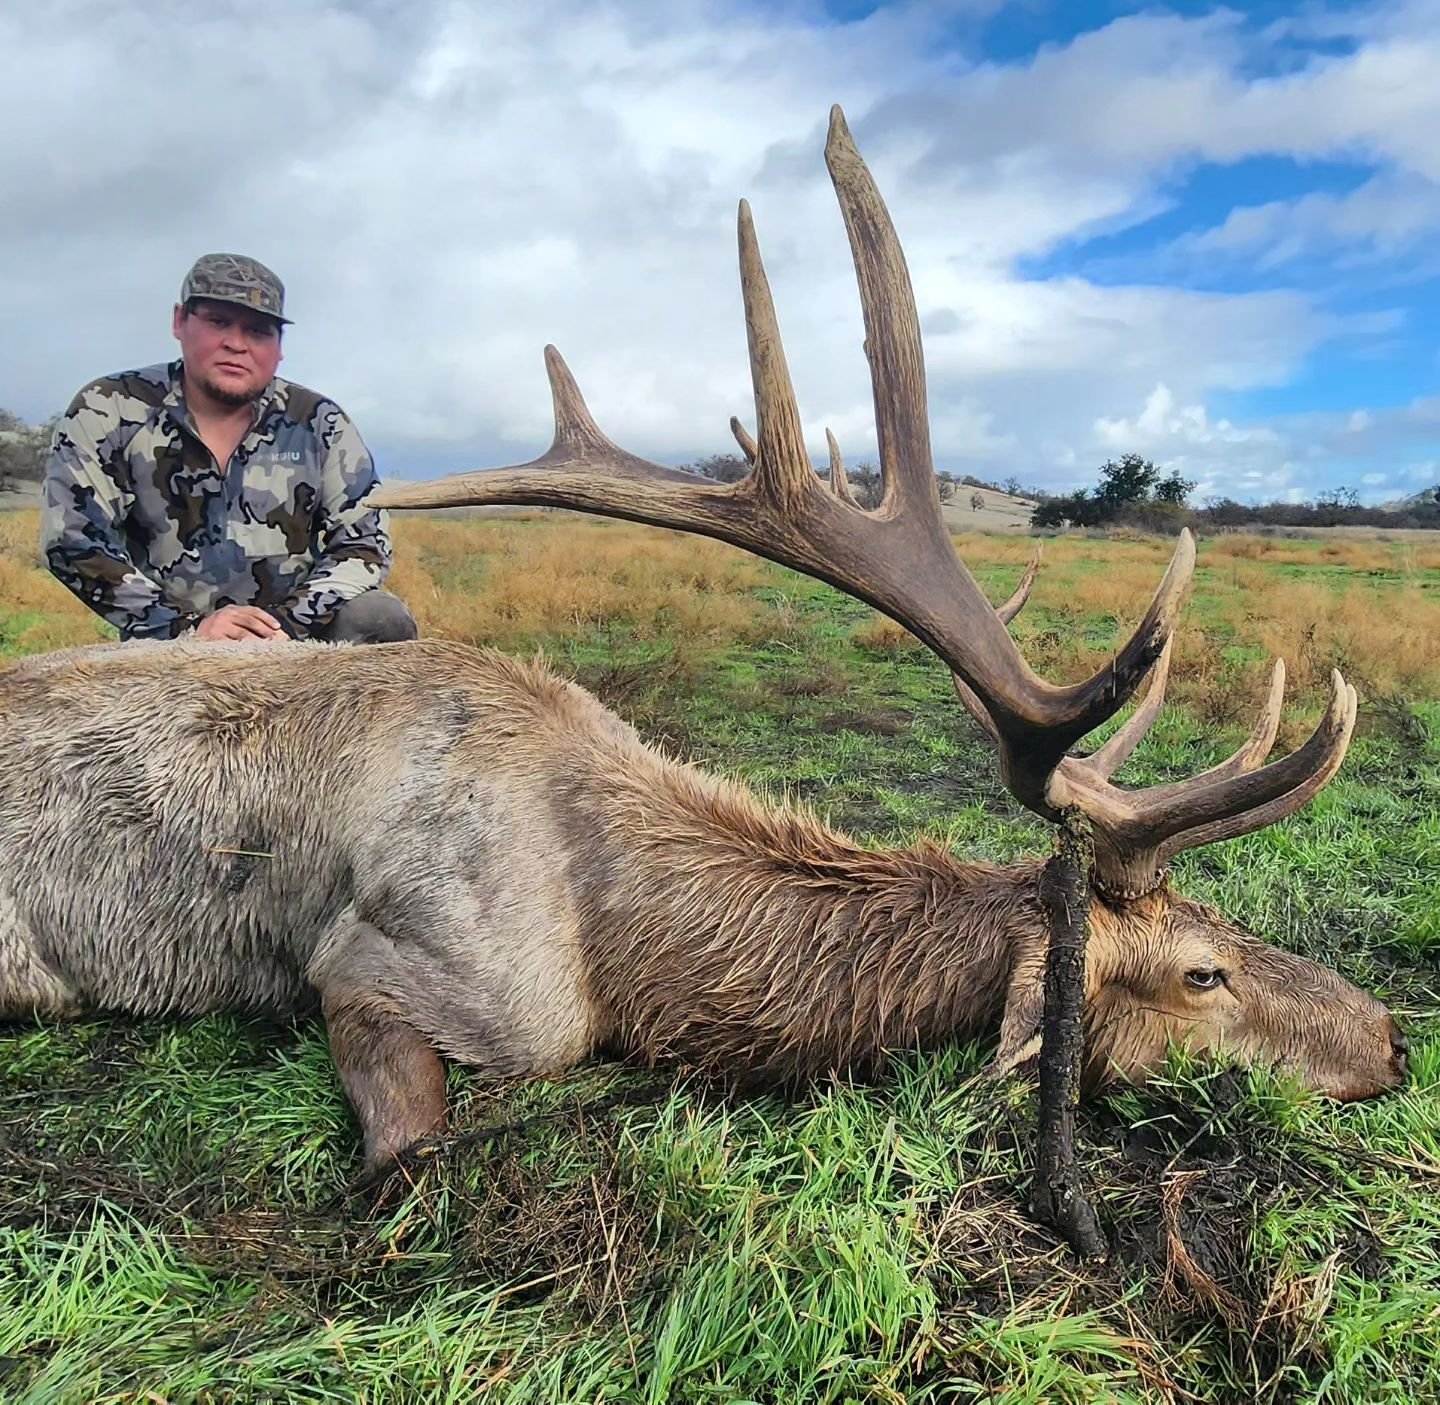 Our Buddy @rob.k_chiefviking with a monster well-earned monster, Tule Bull. Rob put 13 days in on this bull before he was given an opportunity. There is nothing like hearing that gun roar and breaking the silence of such a long hunt. The practice pai